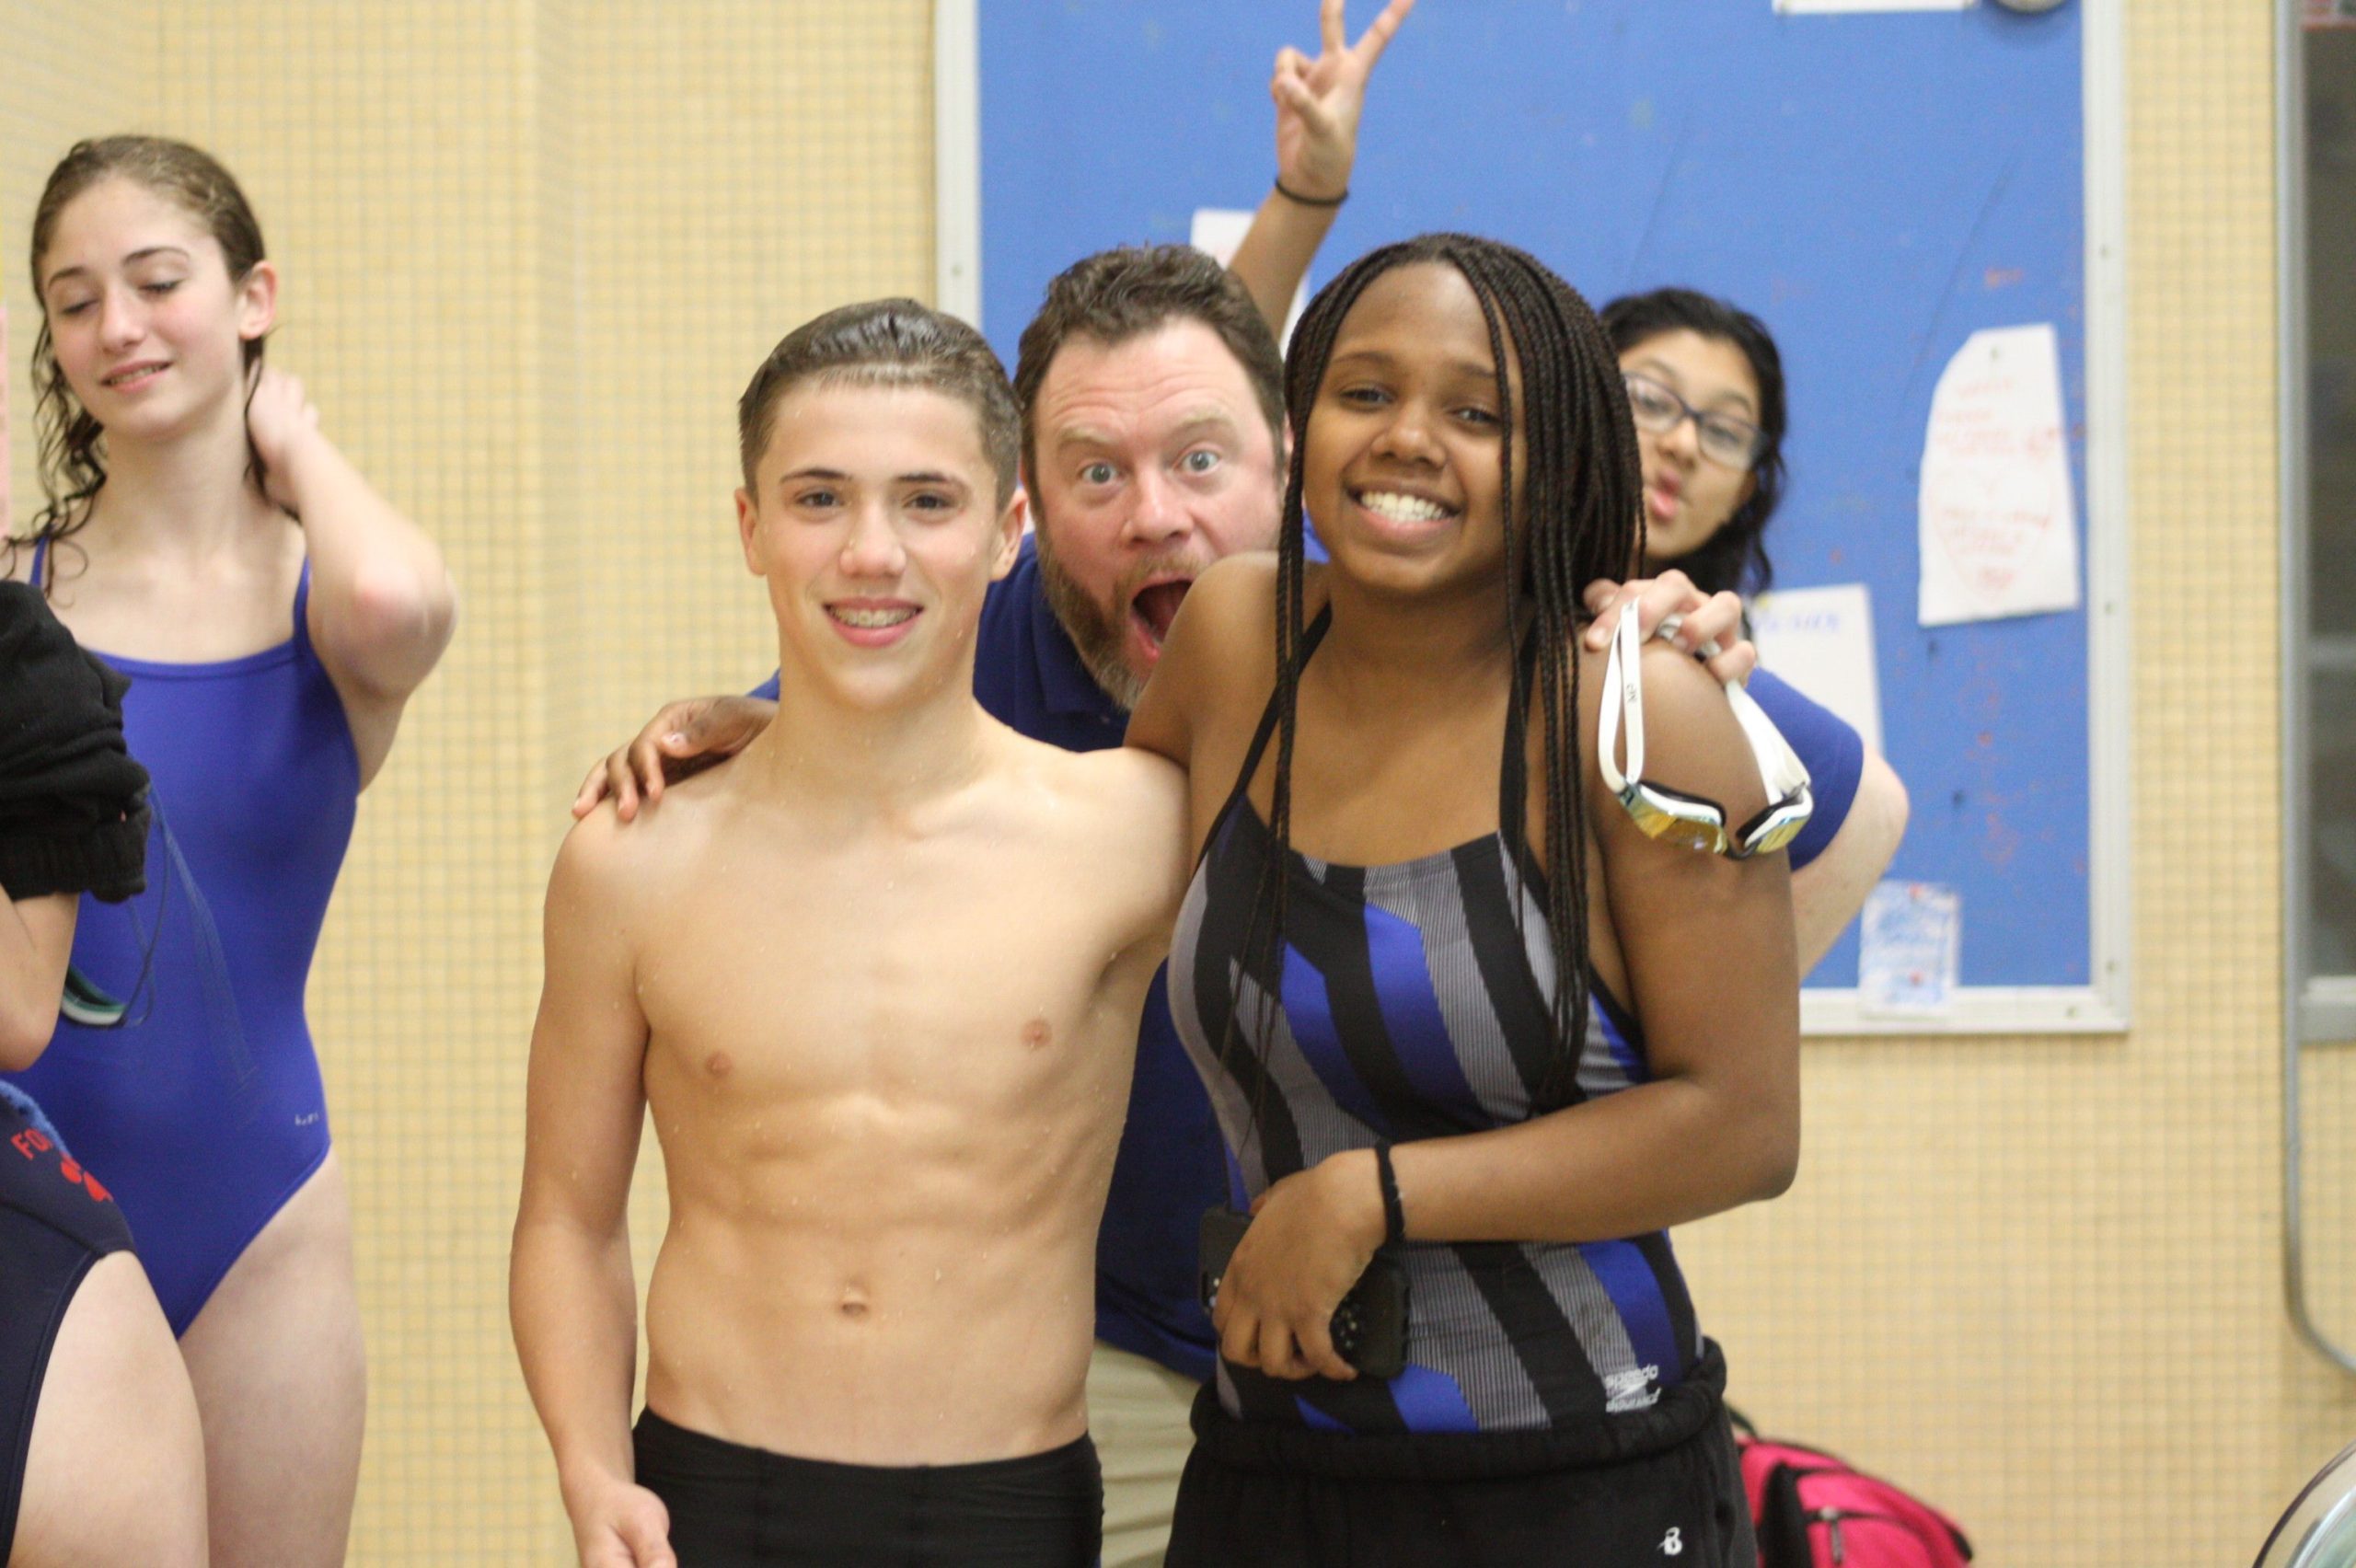 Coach sean with swimmers